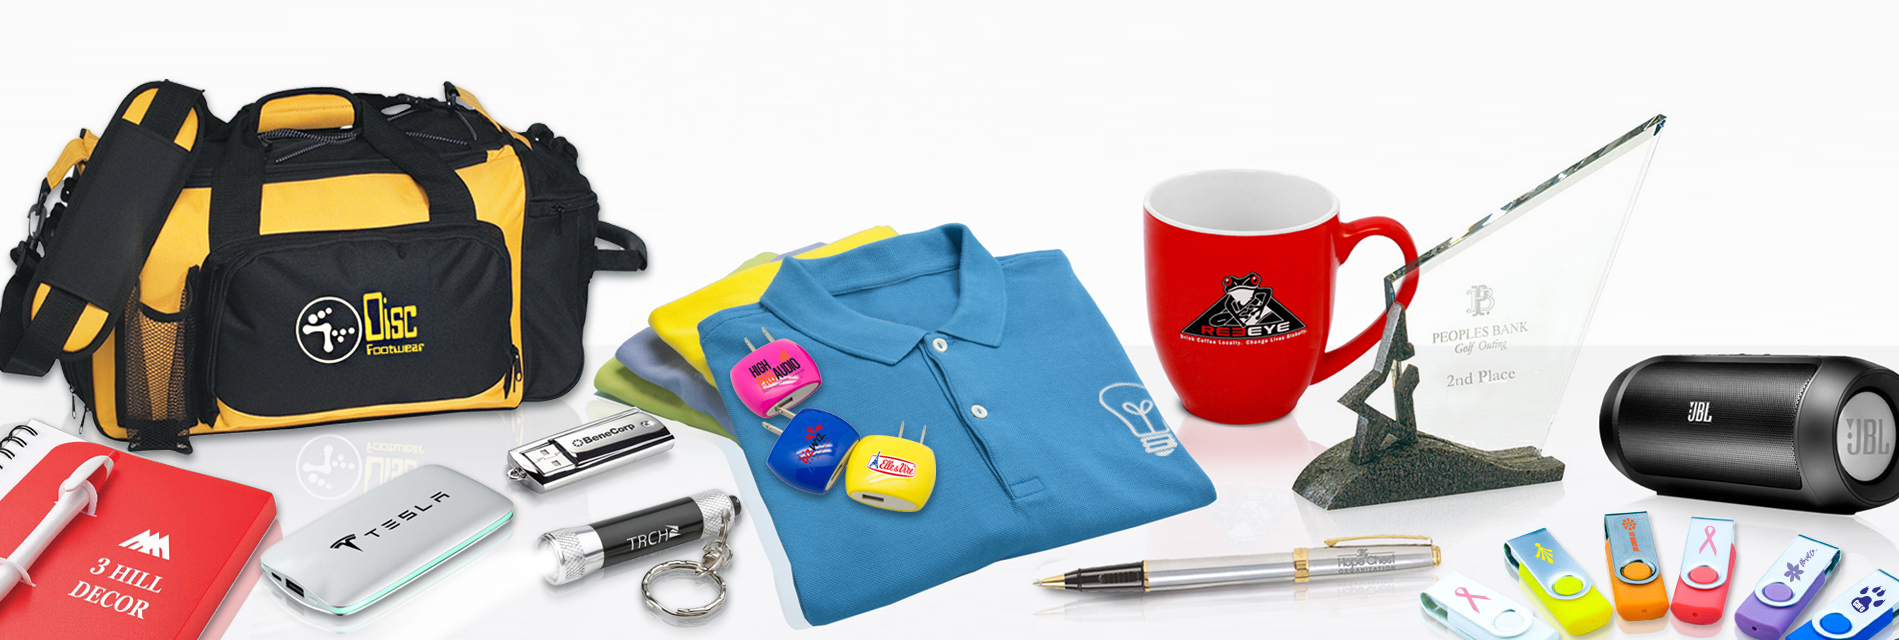 Small Business Promotional Items, Increase Brand Awareness